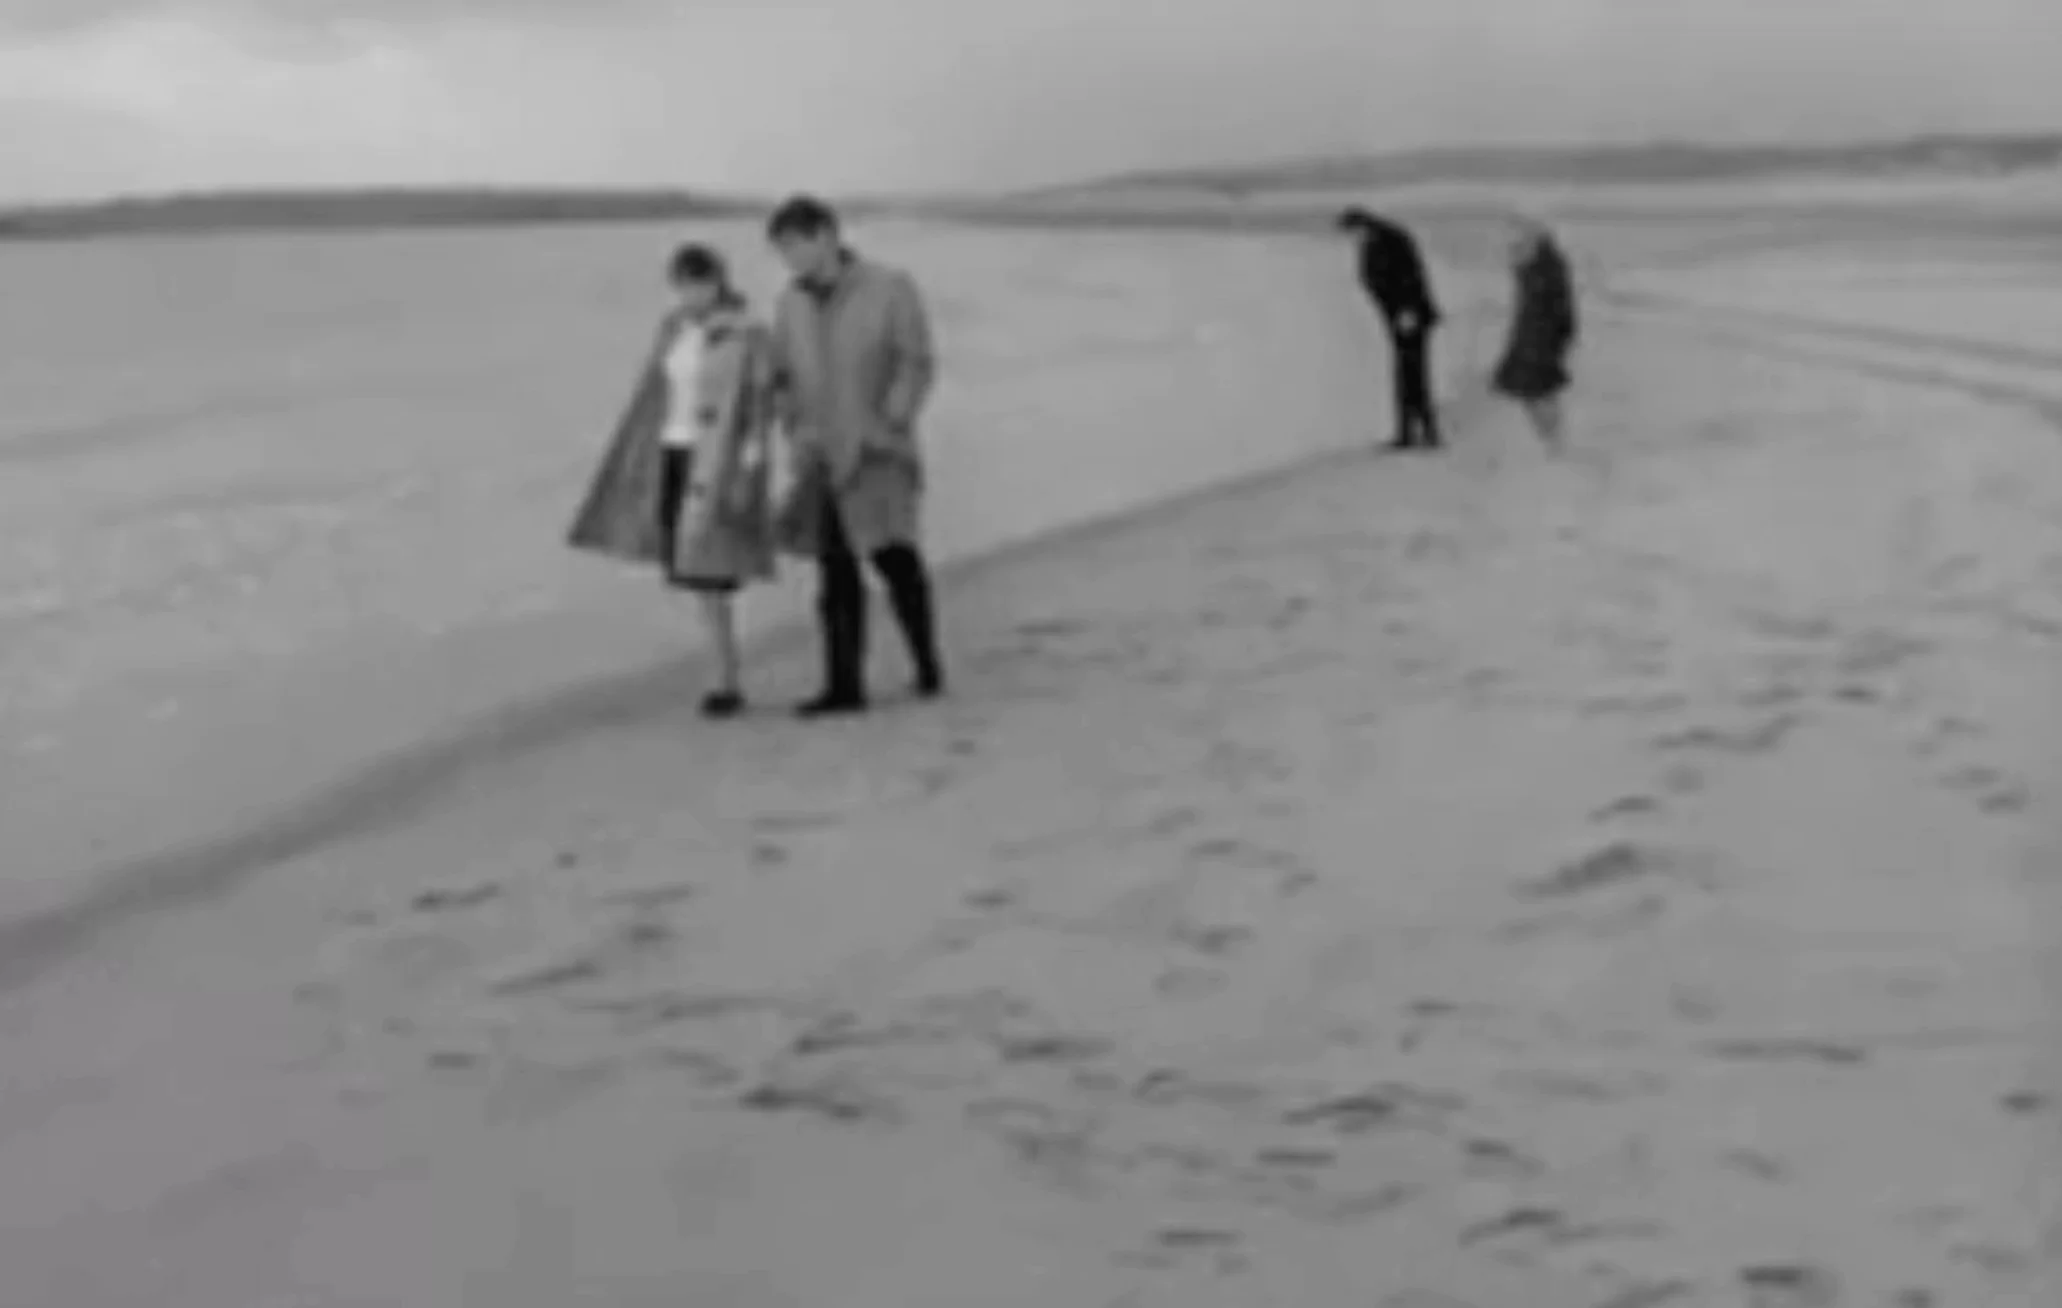 The Loneliness of the Long Distance Runner filmed at Camber Sands